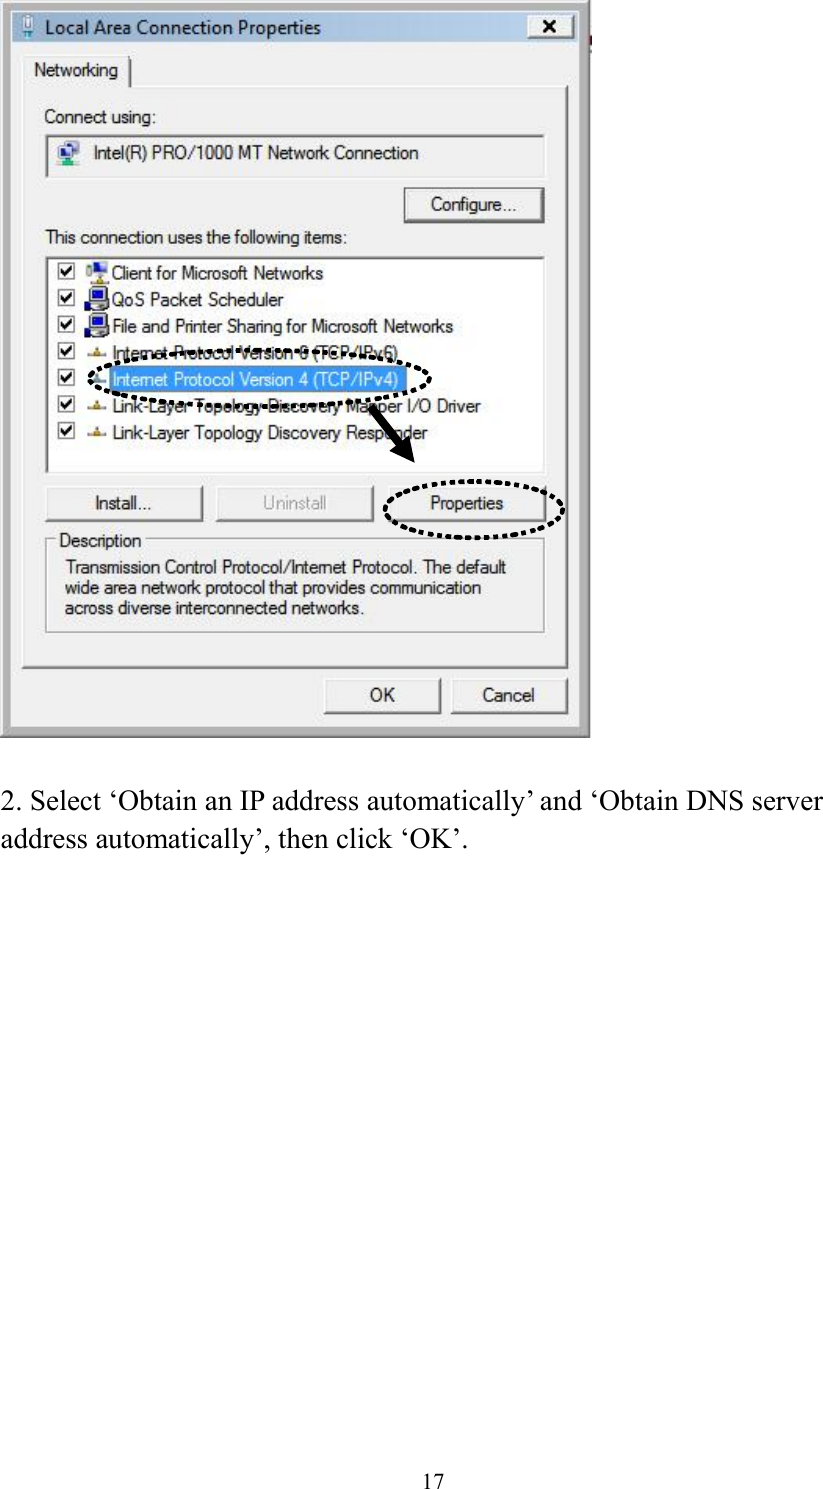 17   2. Select ‘Obtain an IP address automatically’ and ‘Obtain DNS server address automatically’, then click ‘OK’.  